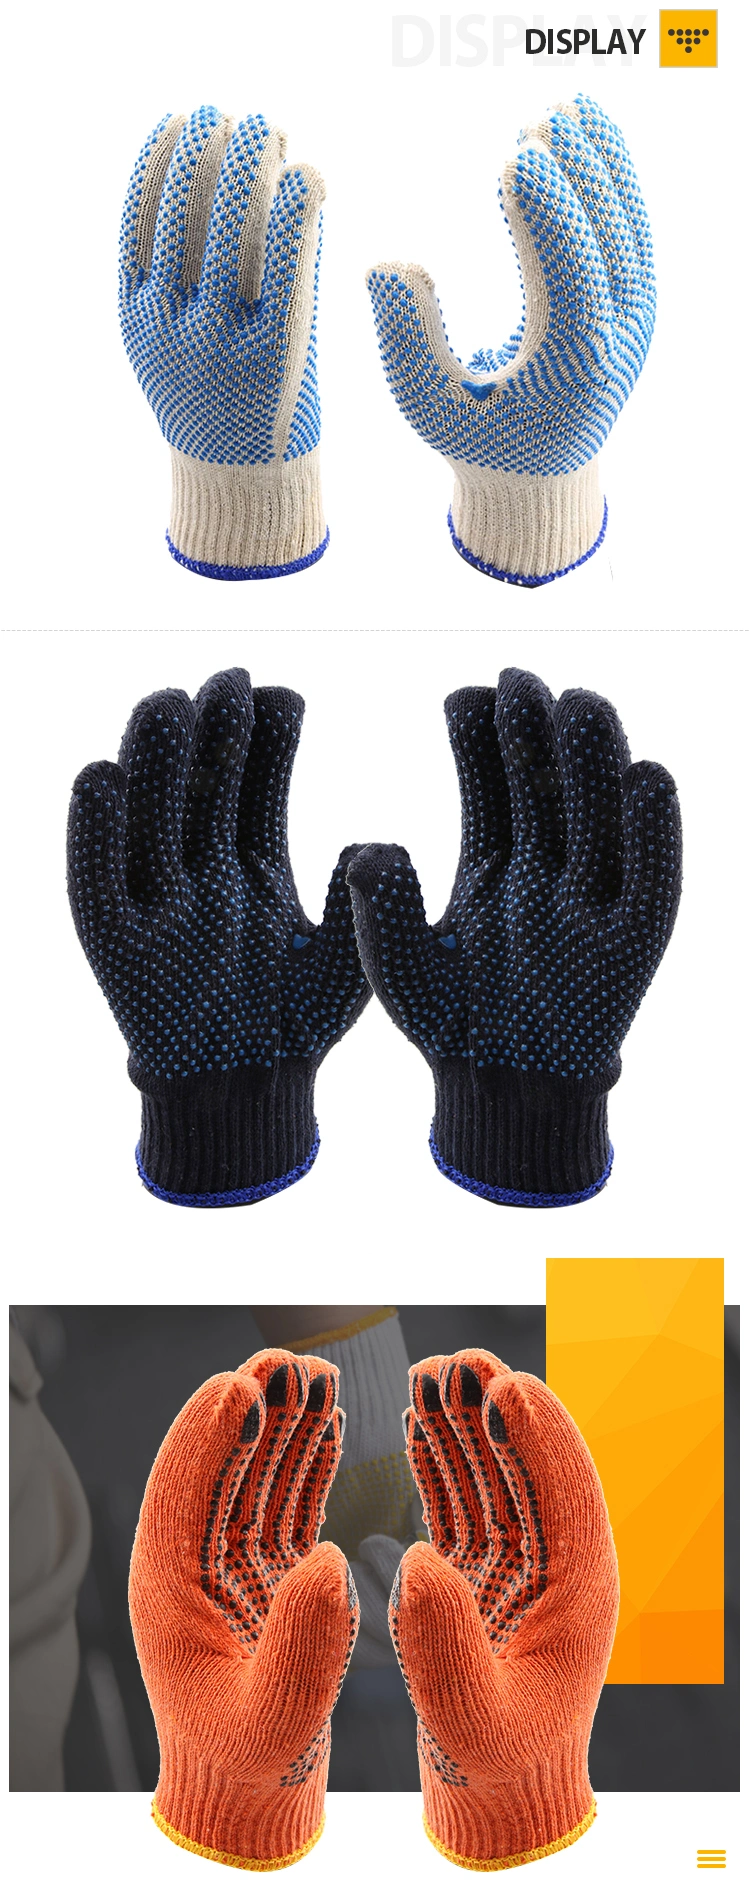 PVC Dotted 60% Cotton+40% Polyster Yarn Knitted Gloves Safety Glove Anti Slip Working Gloves